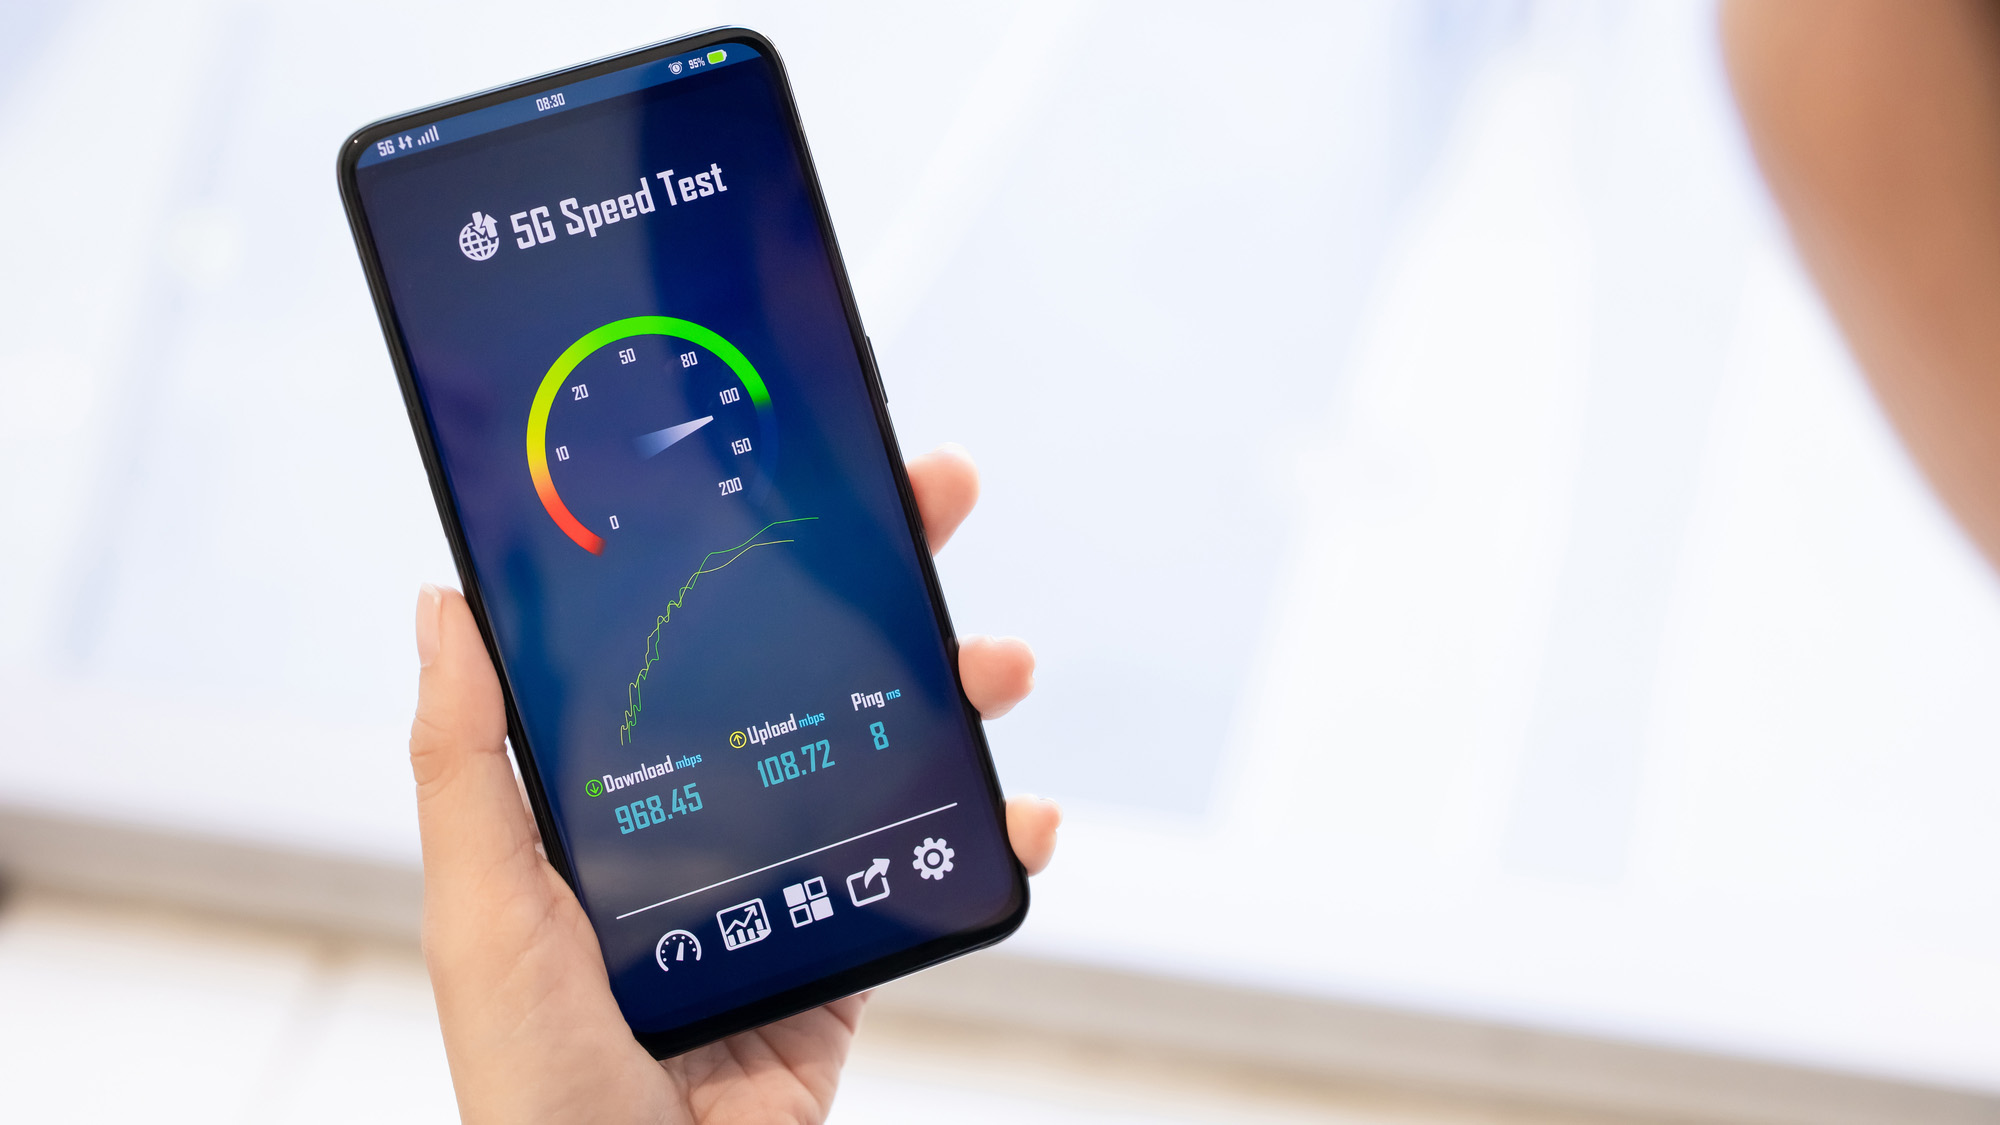 Click Speed Test - Product Information, Latest Updates, and Reviews 2023